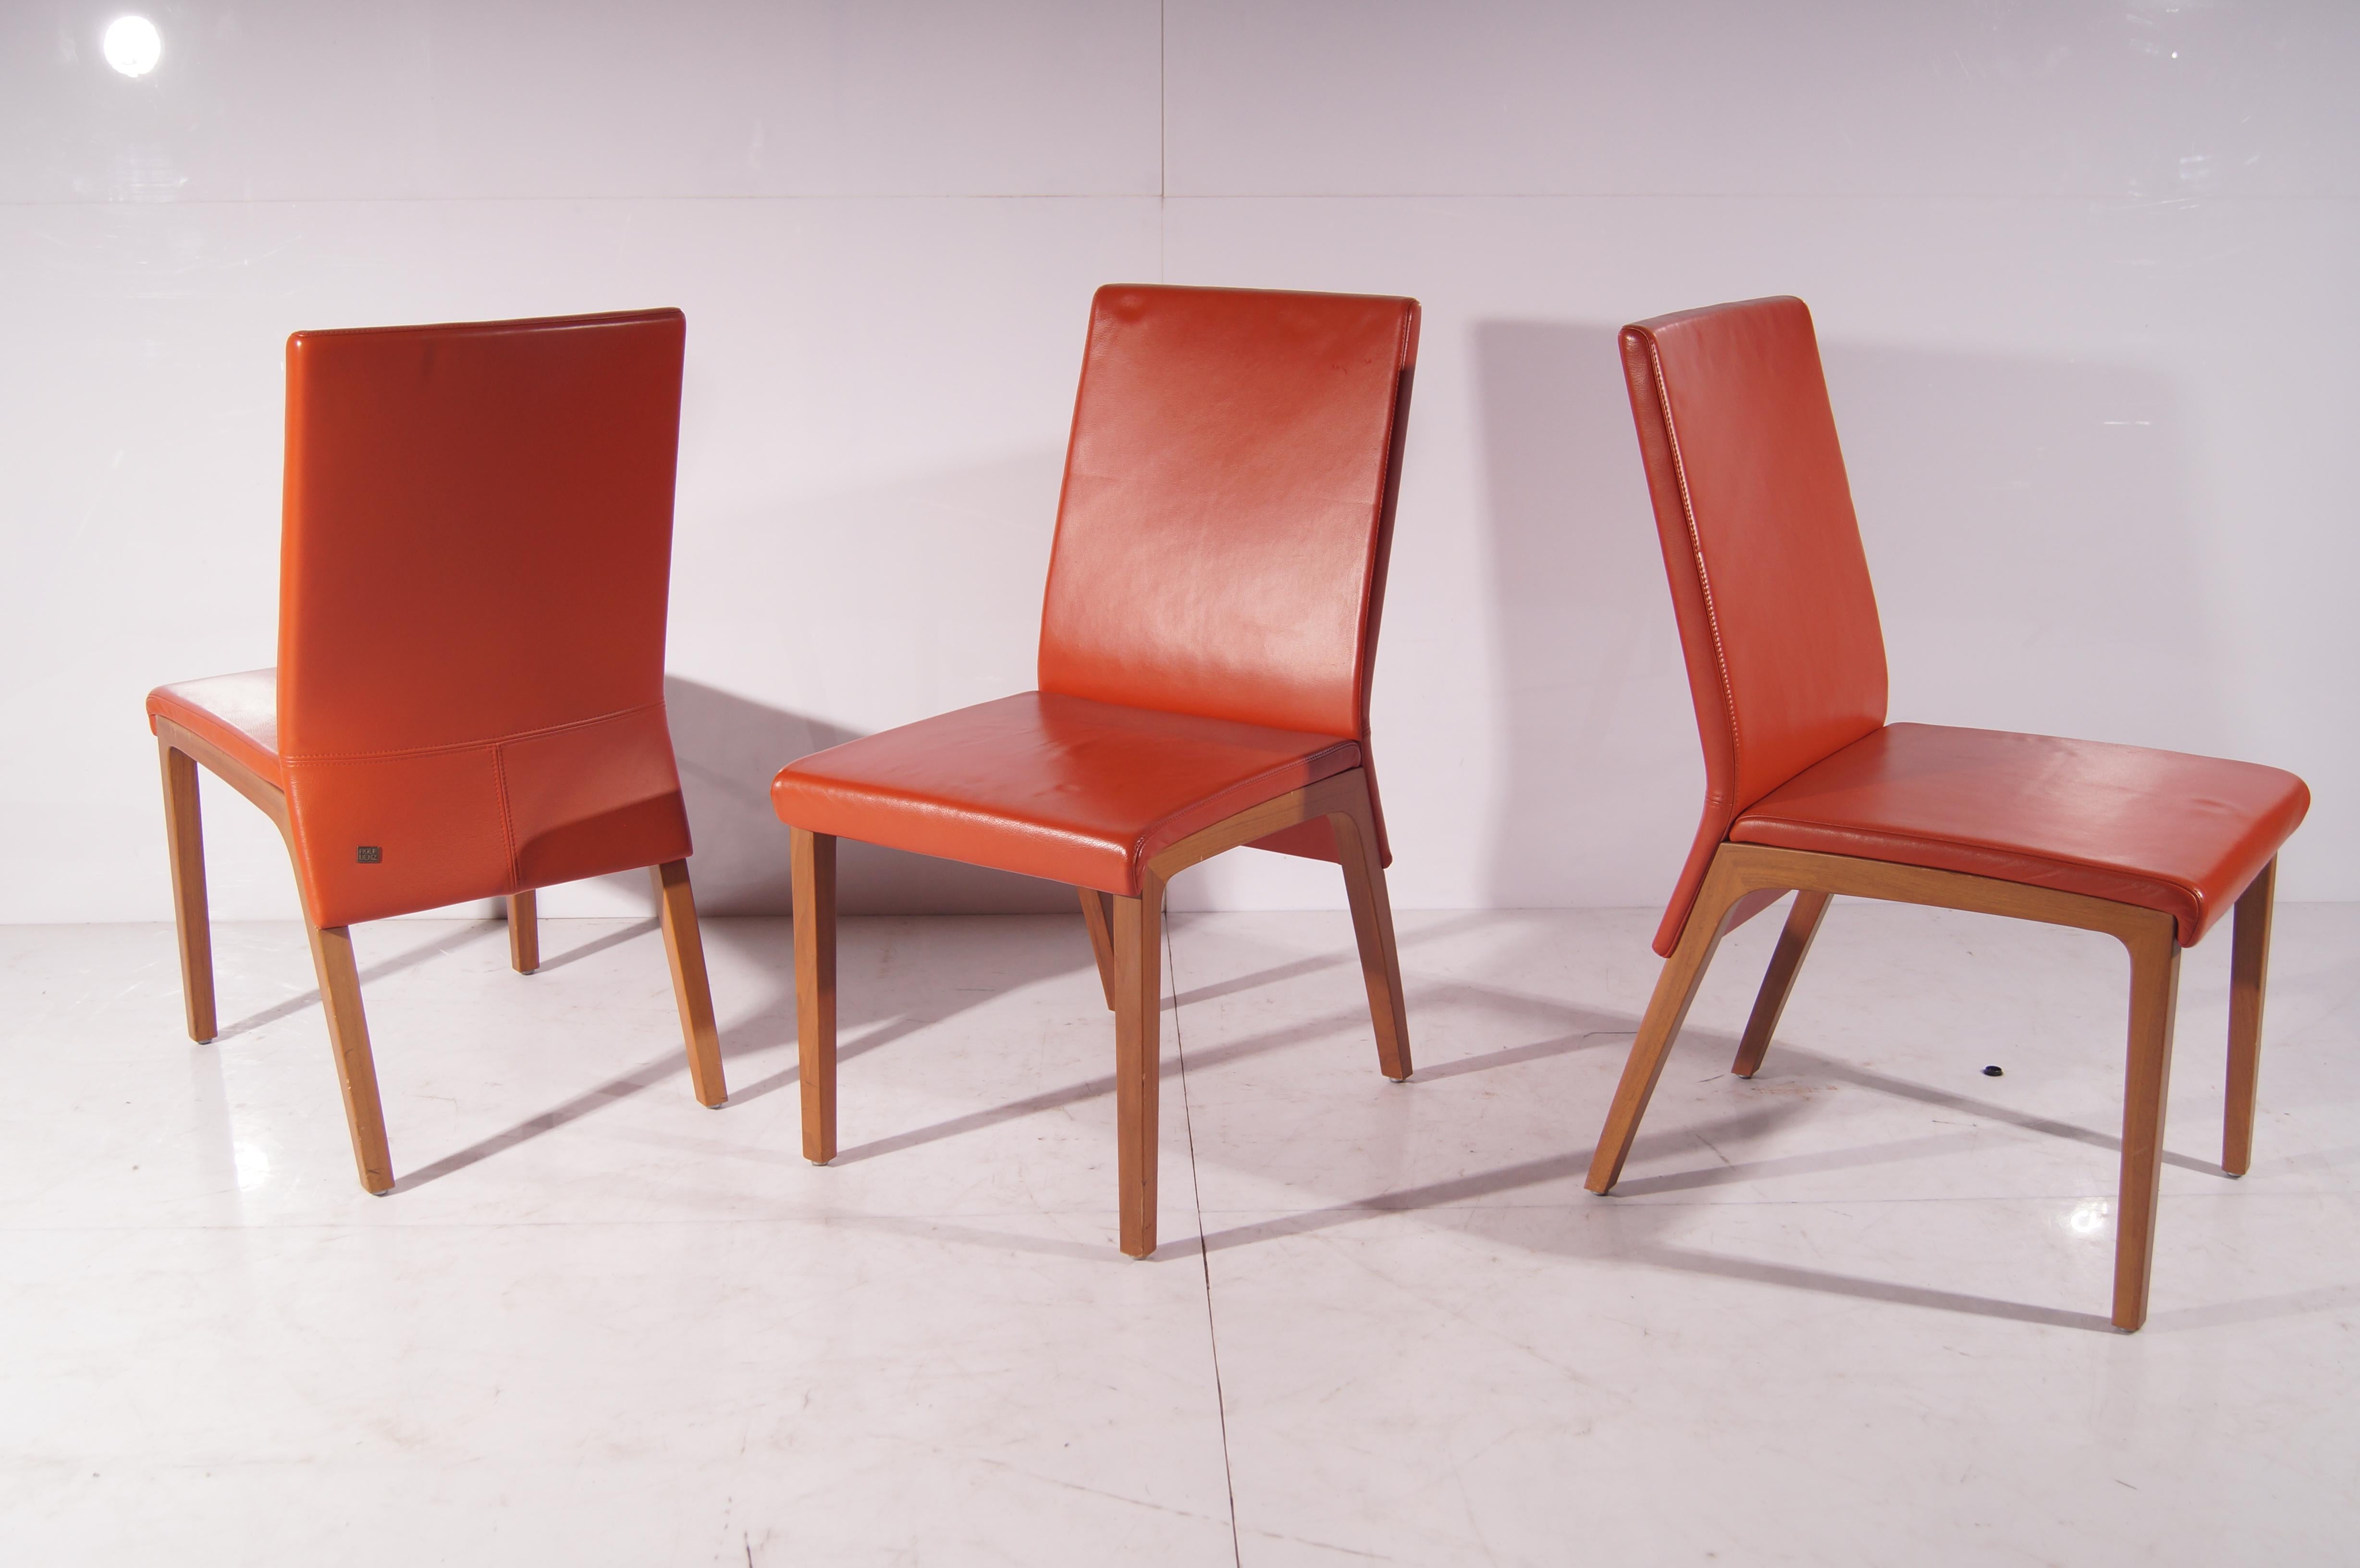 Rolf Benz - Dining room chair in orange leather 8